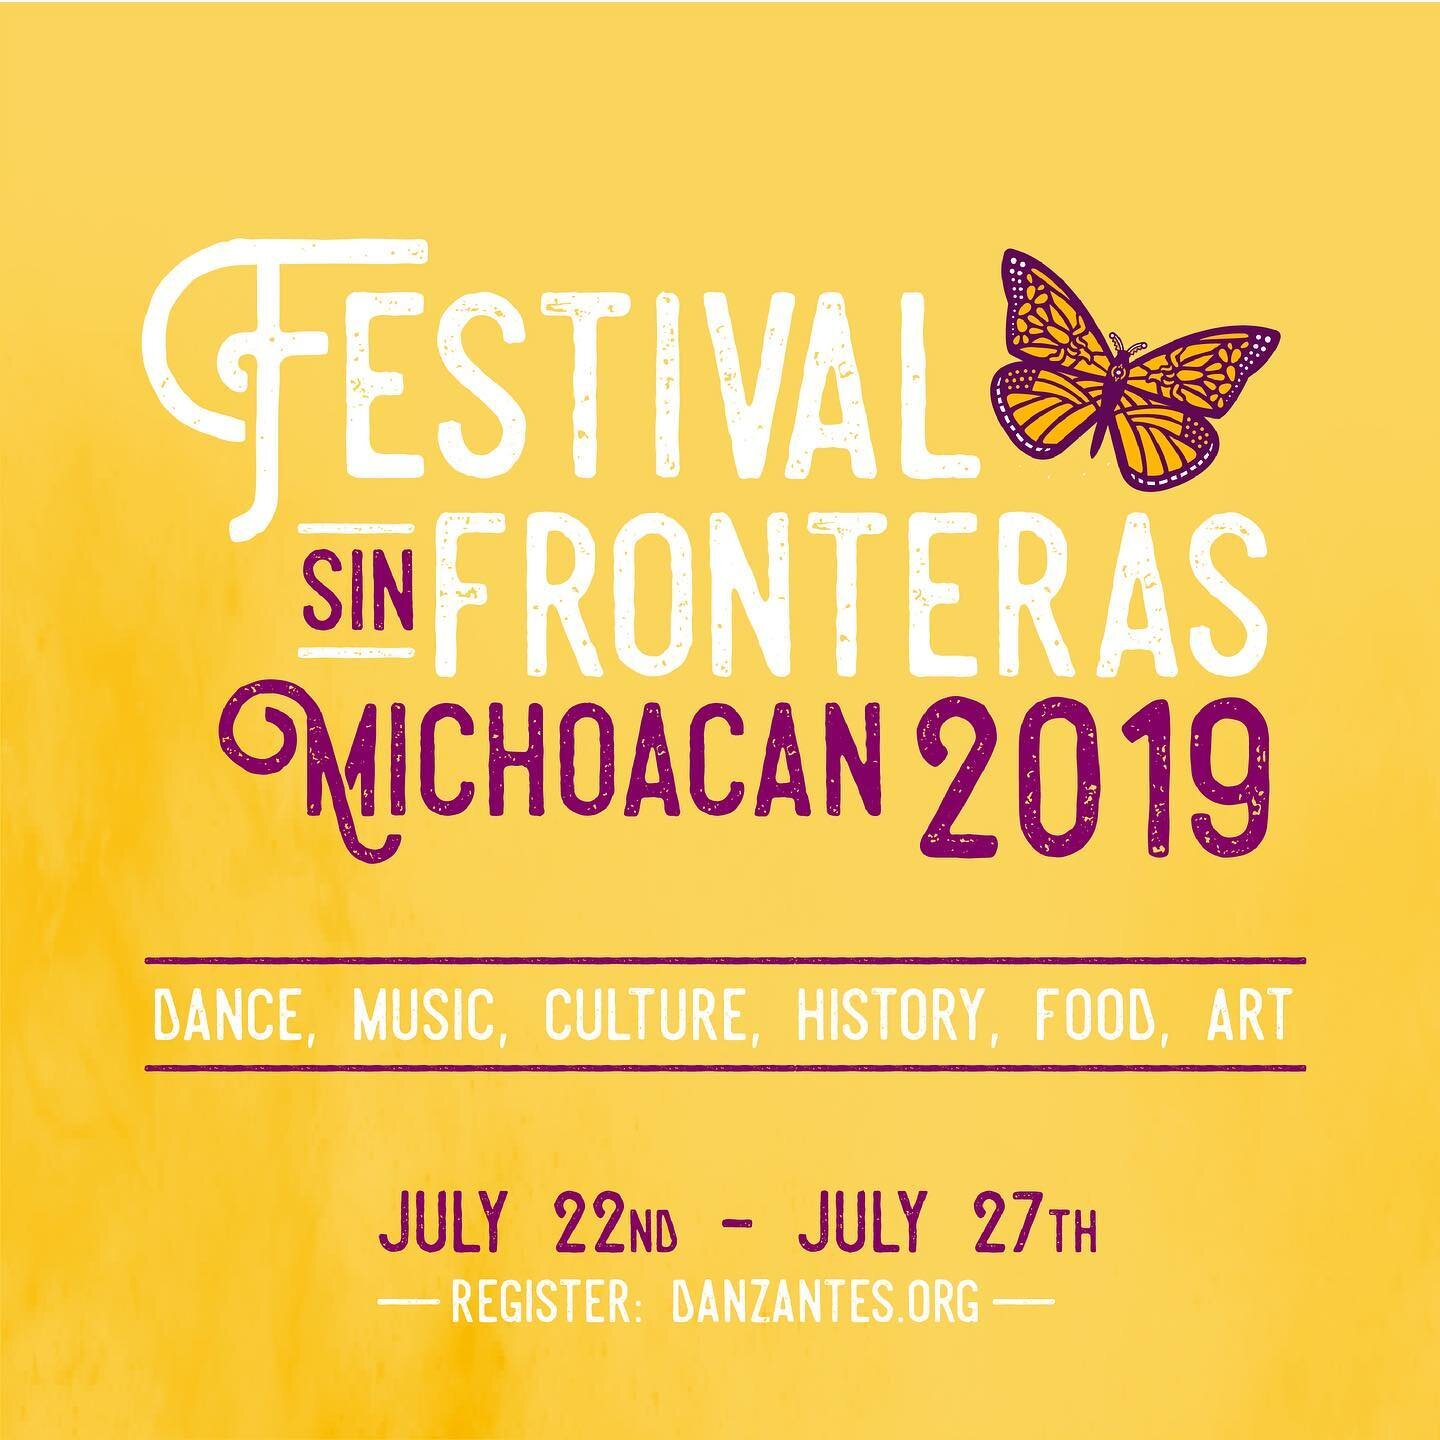 Throwback to our Branding for Festival Sin Fronteras which took place in Michoacan, in the summer of 2019. 

Festival Sin Fronteras is a festival that celebrates the folklore, the culture, music, art, dance, history and food of regions in Mexico! Hos